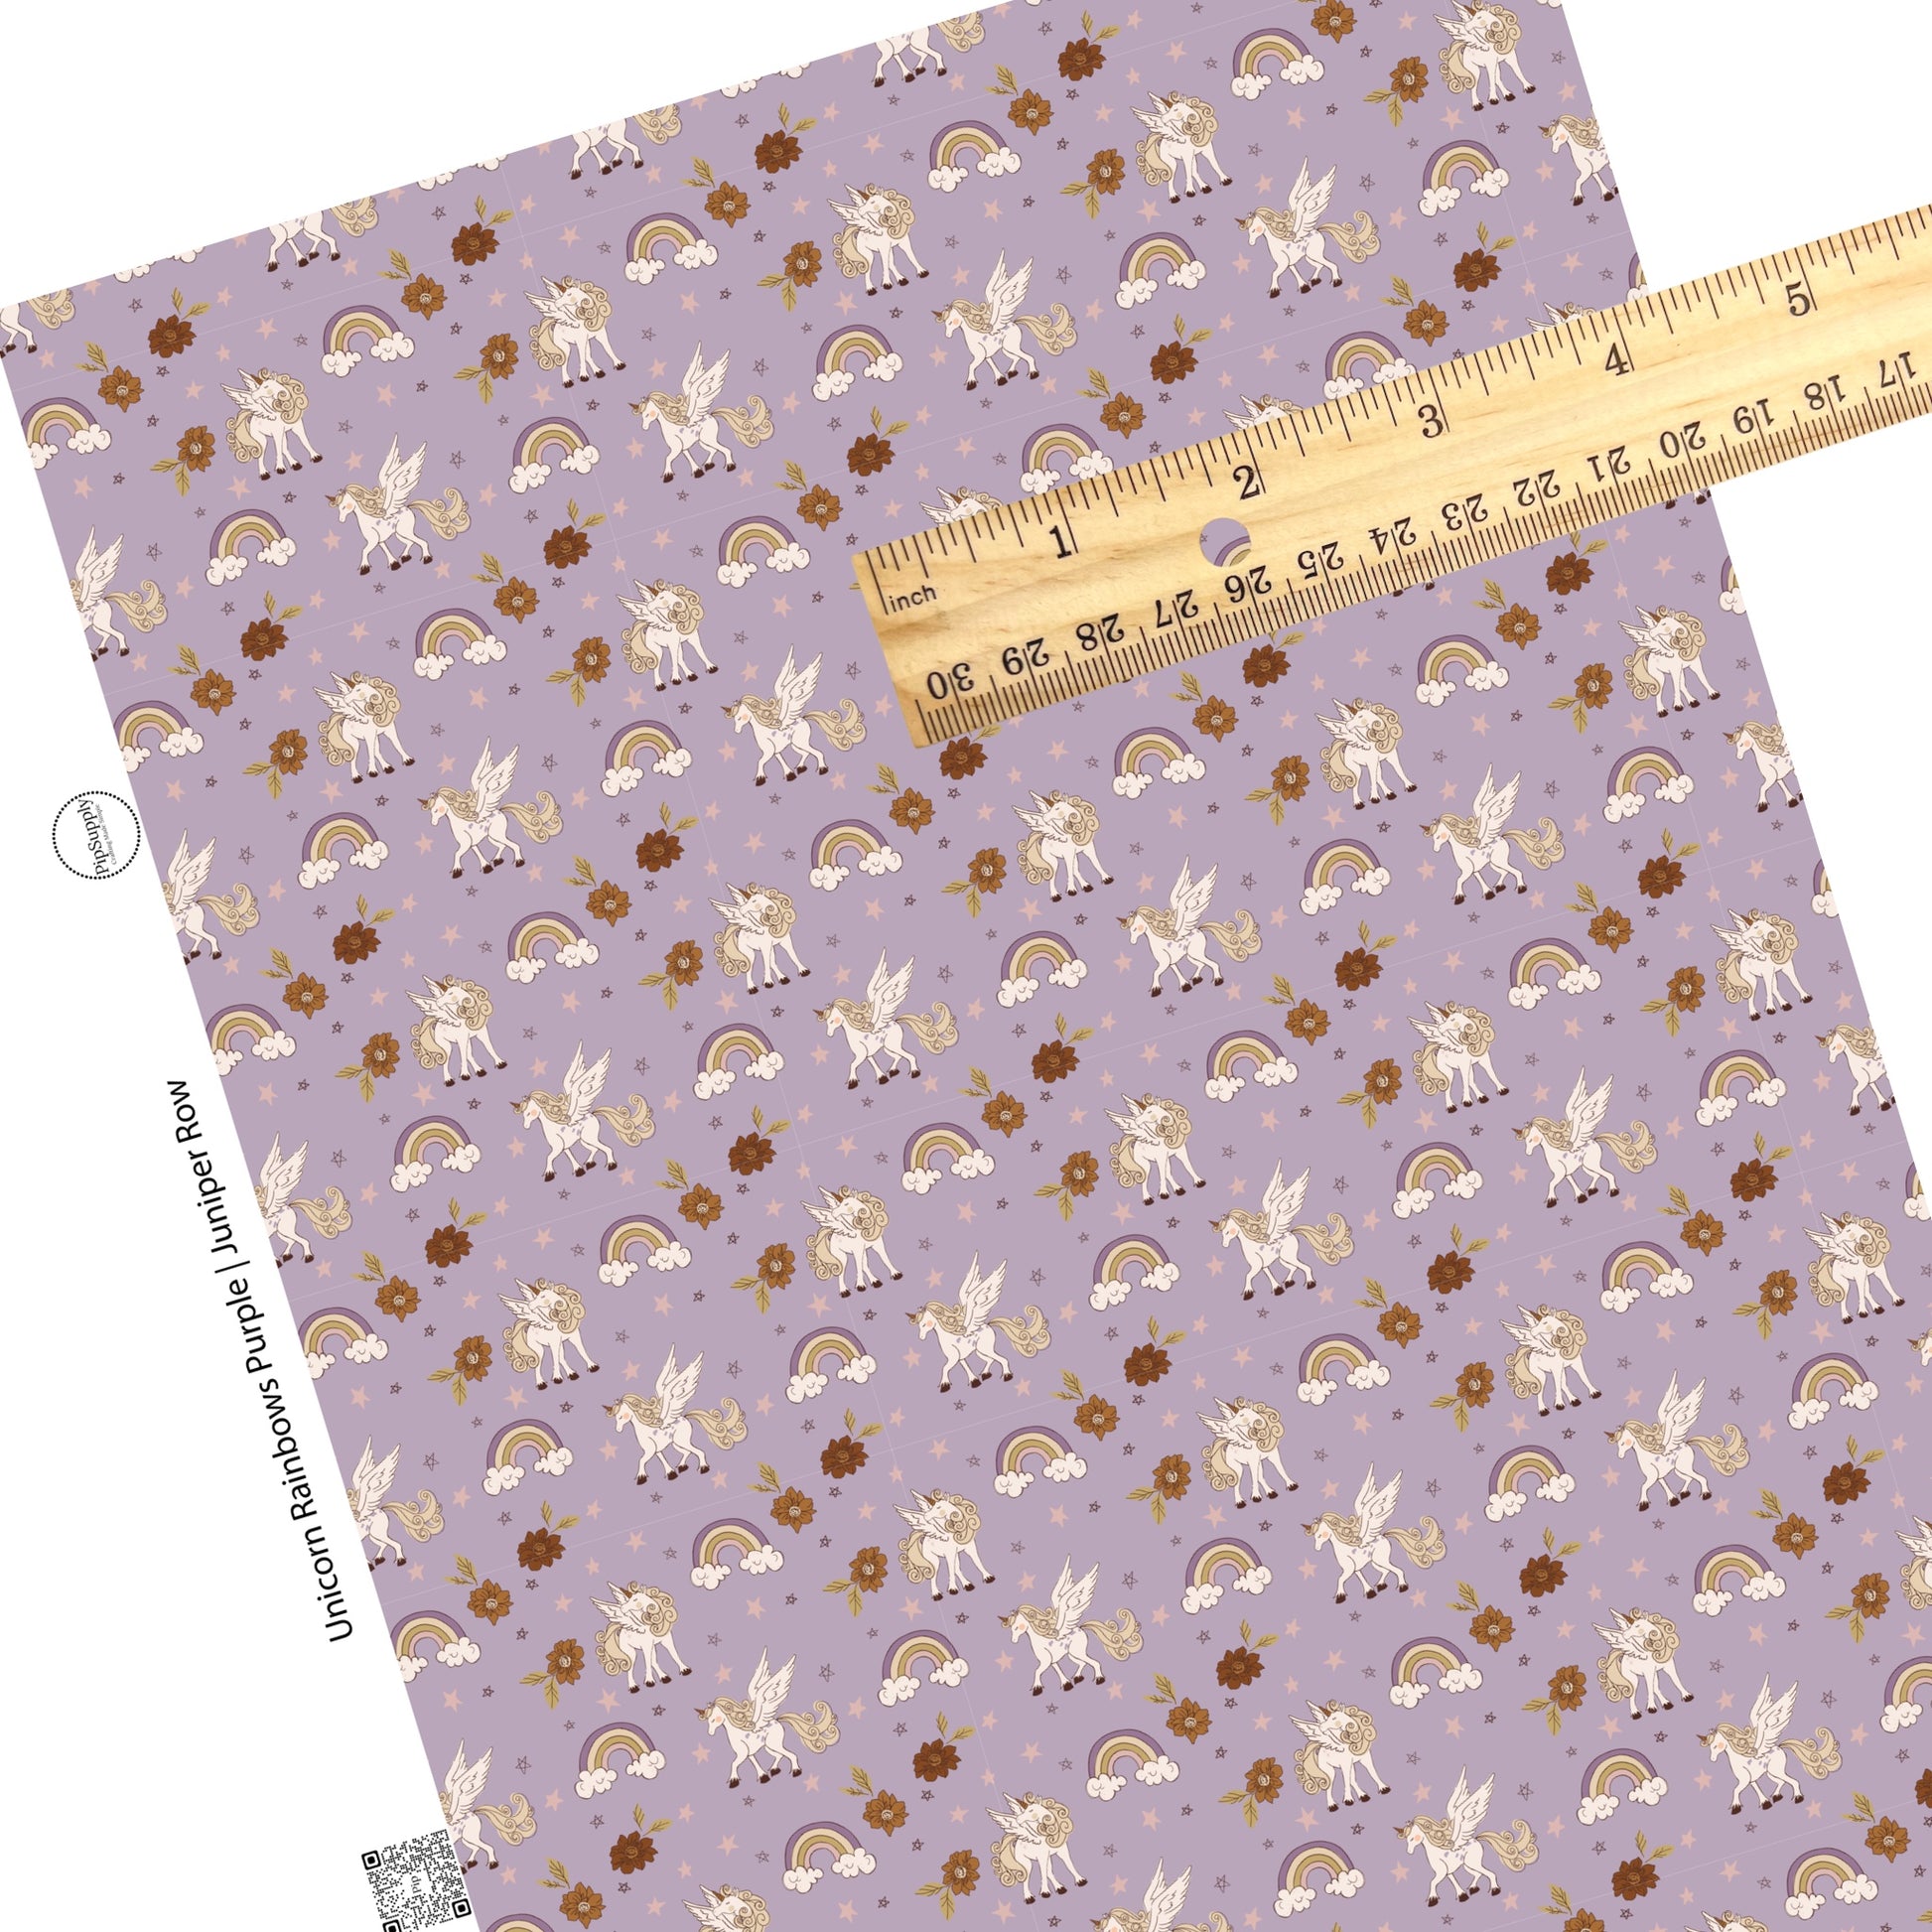 Brown flowers with purple rainbows and white unicorns on purple faux leather sheet